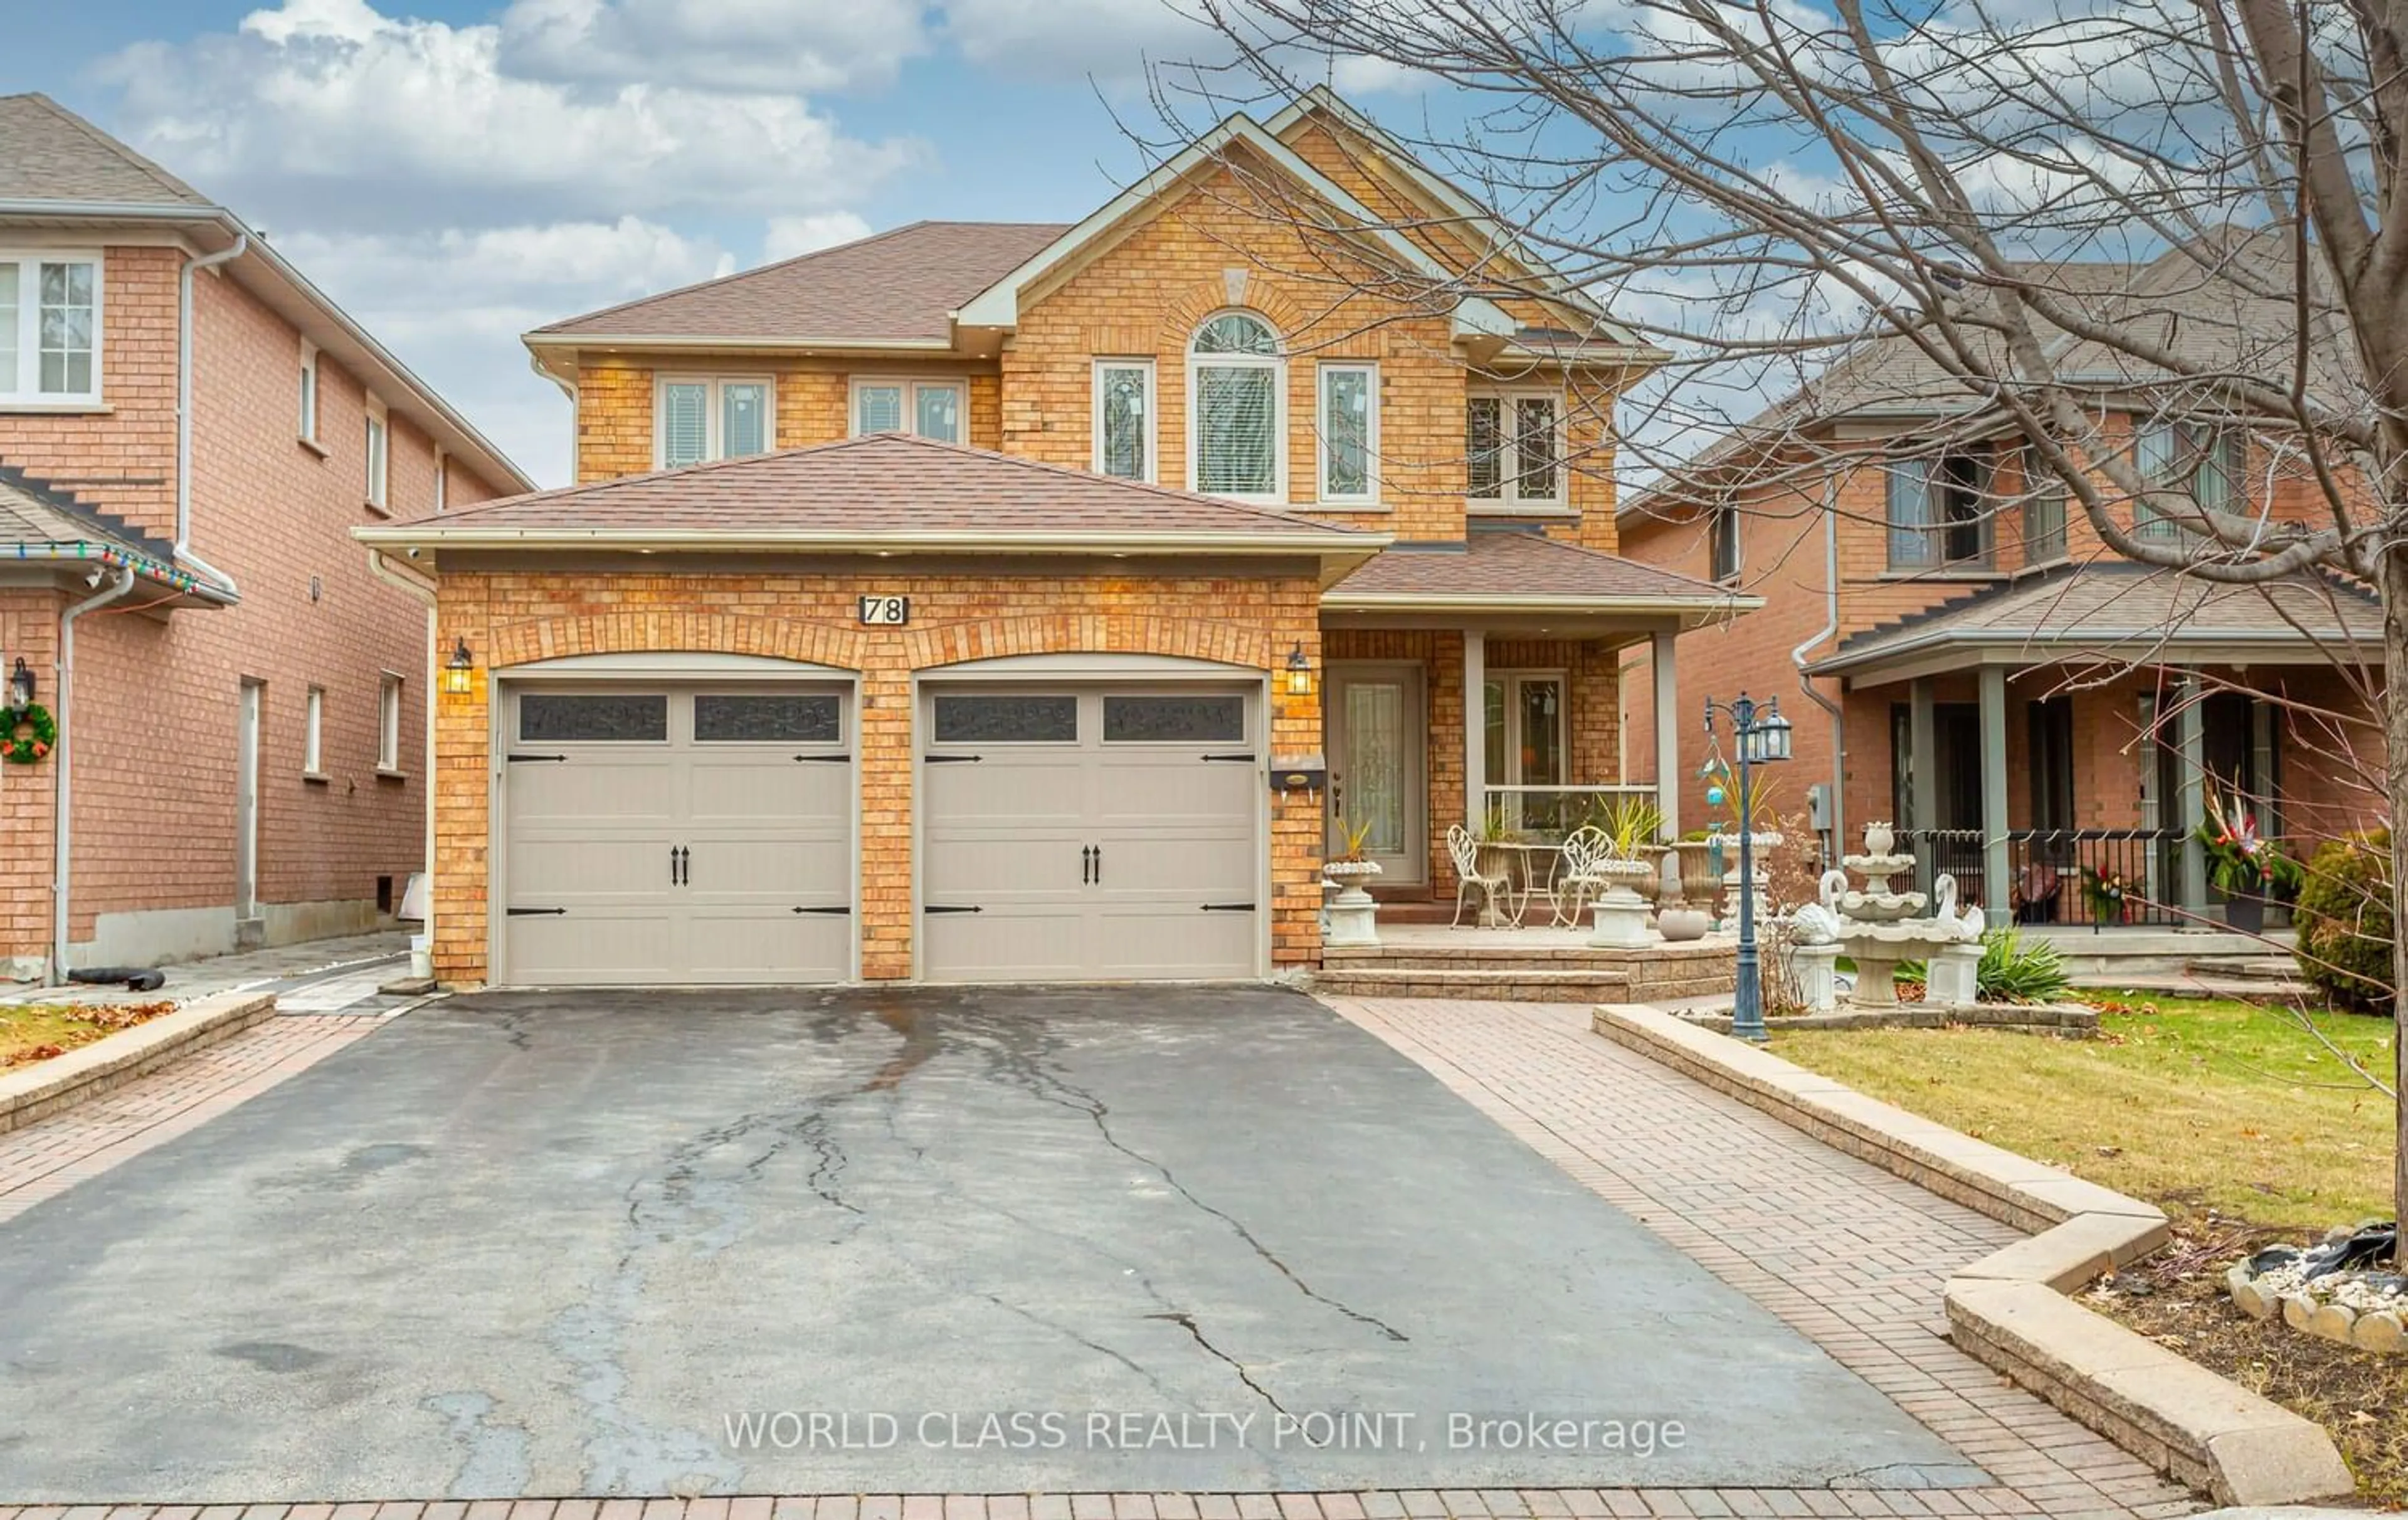 Home with brick exterior material for 78 Song Bird Dr, Markham Ontario L3S 3T8